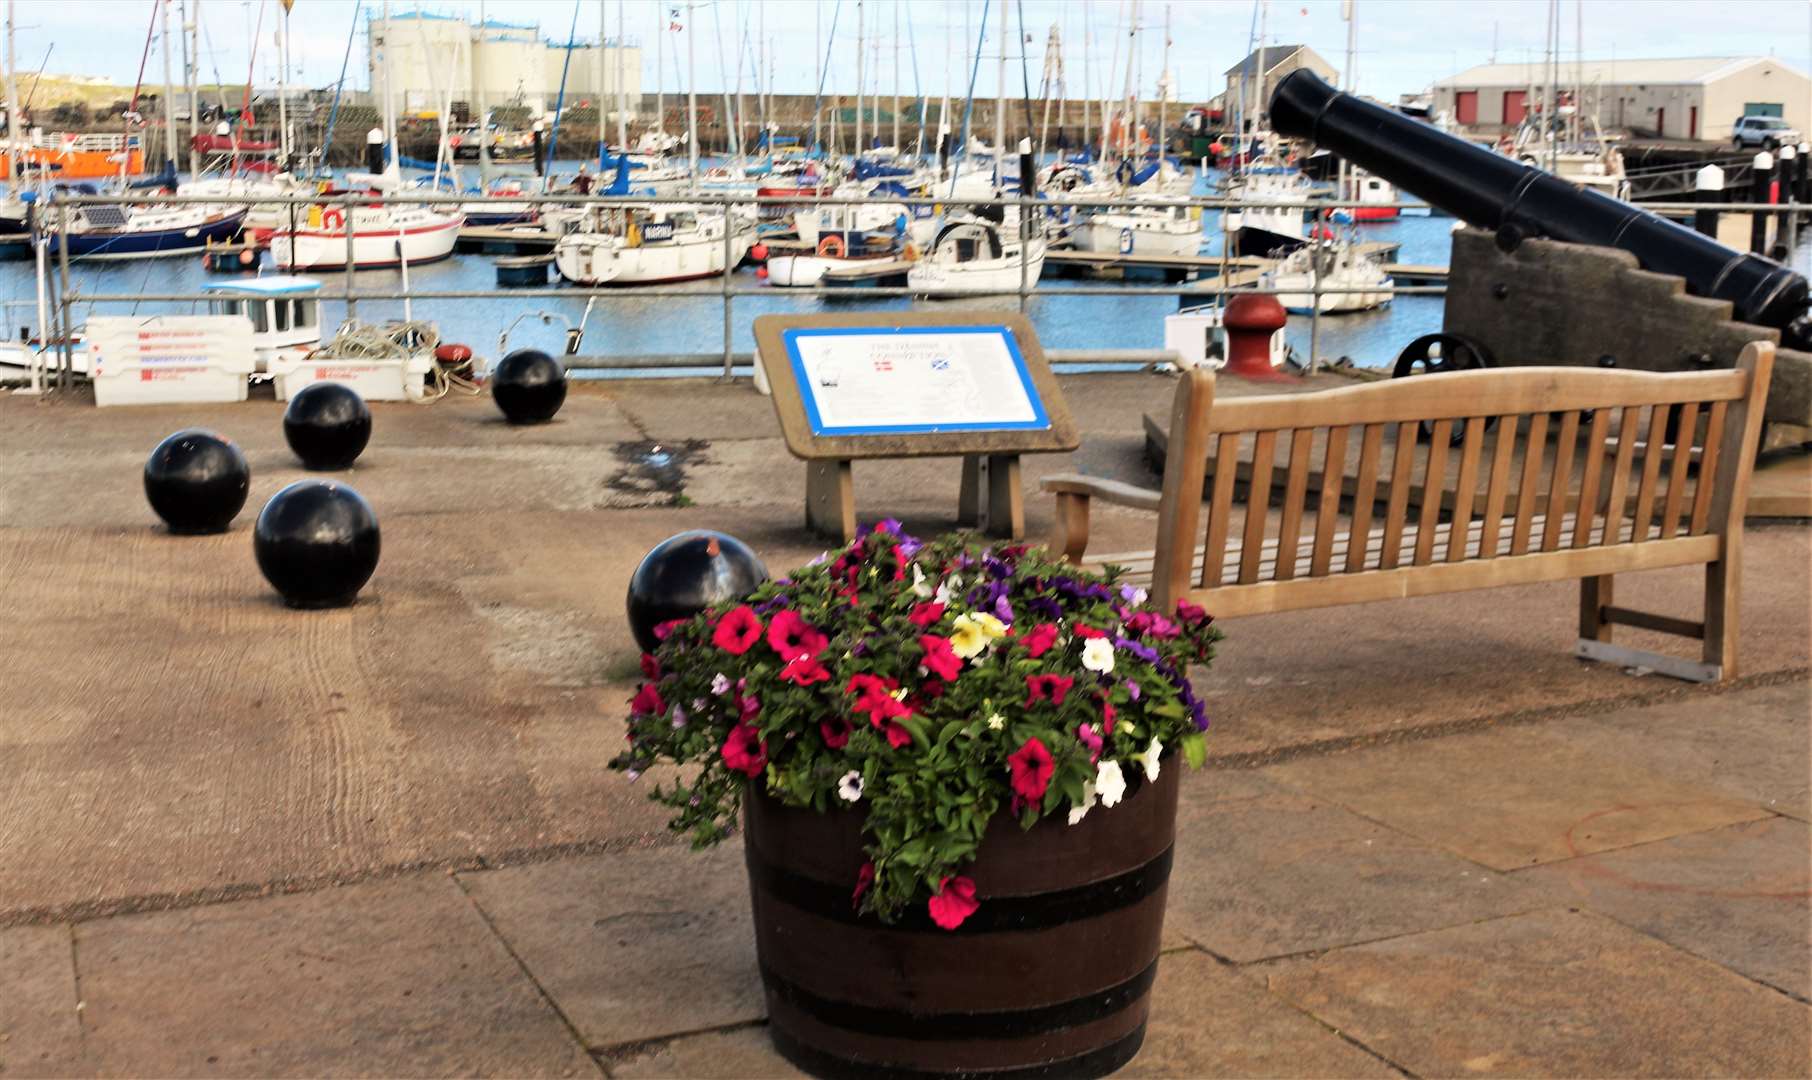 A planter at Wick harbour. Picture: Eswyl Fell